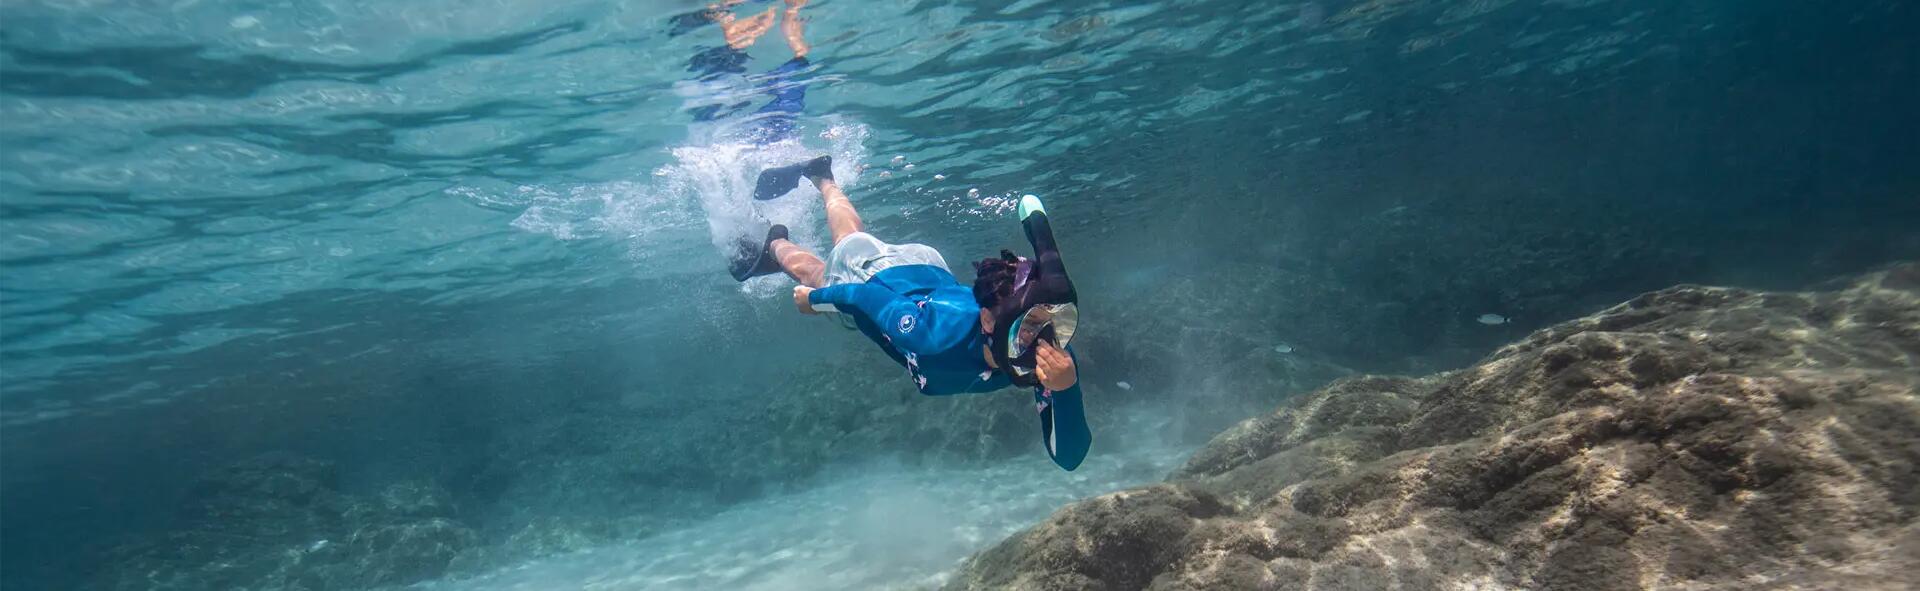 Diving| safety tips for divers and snorkelers